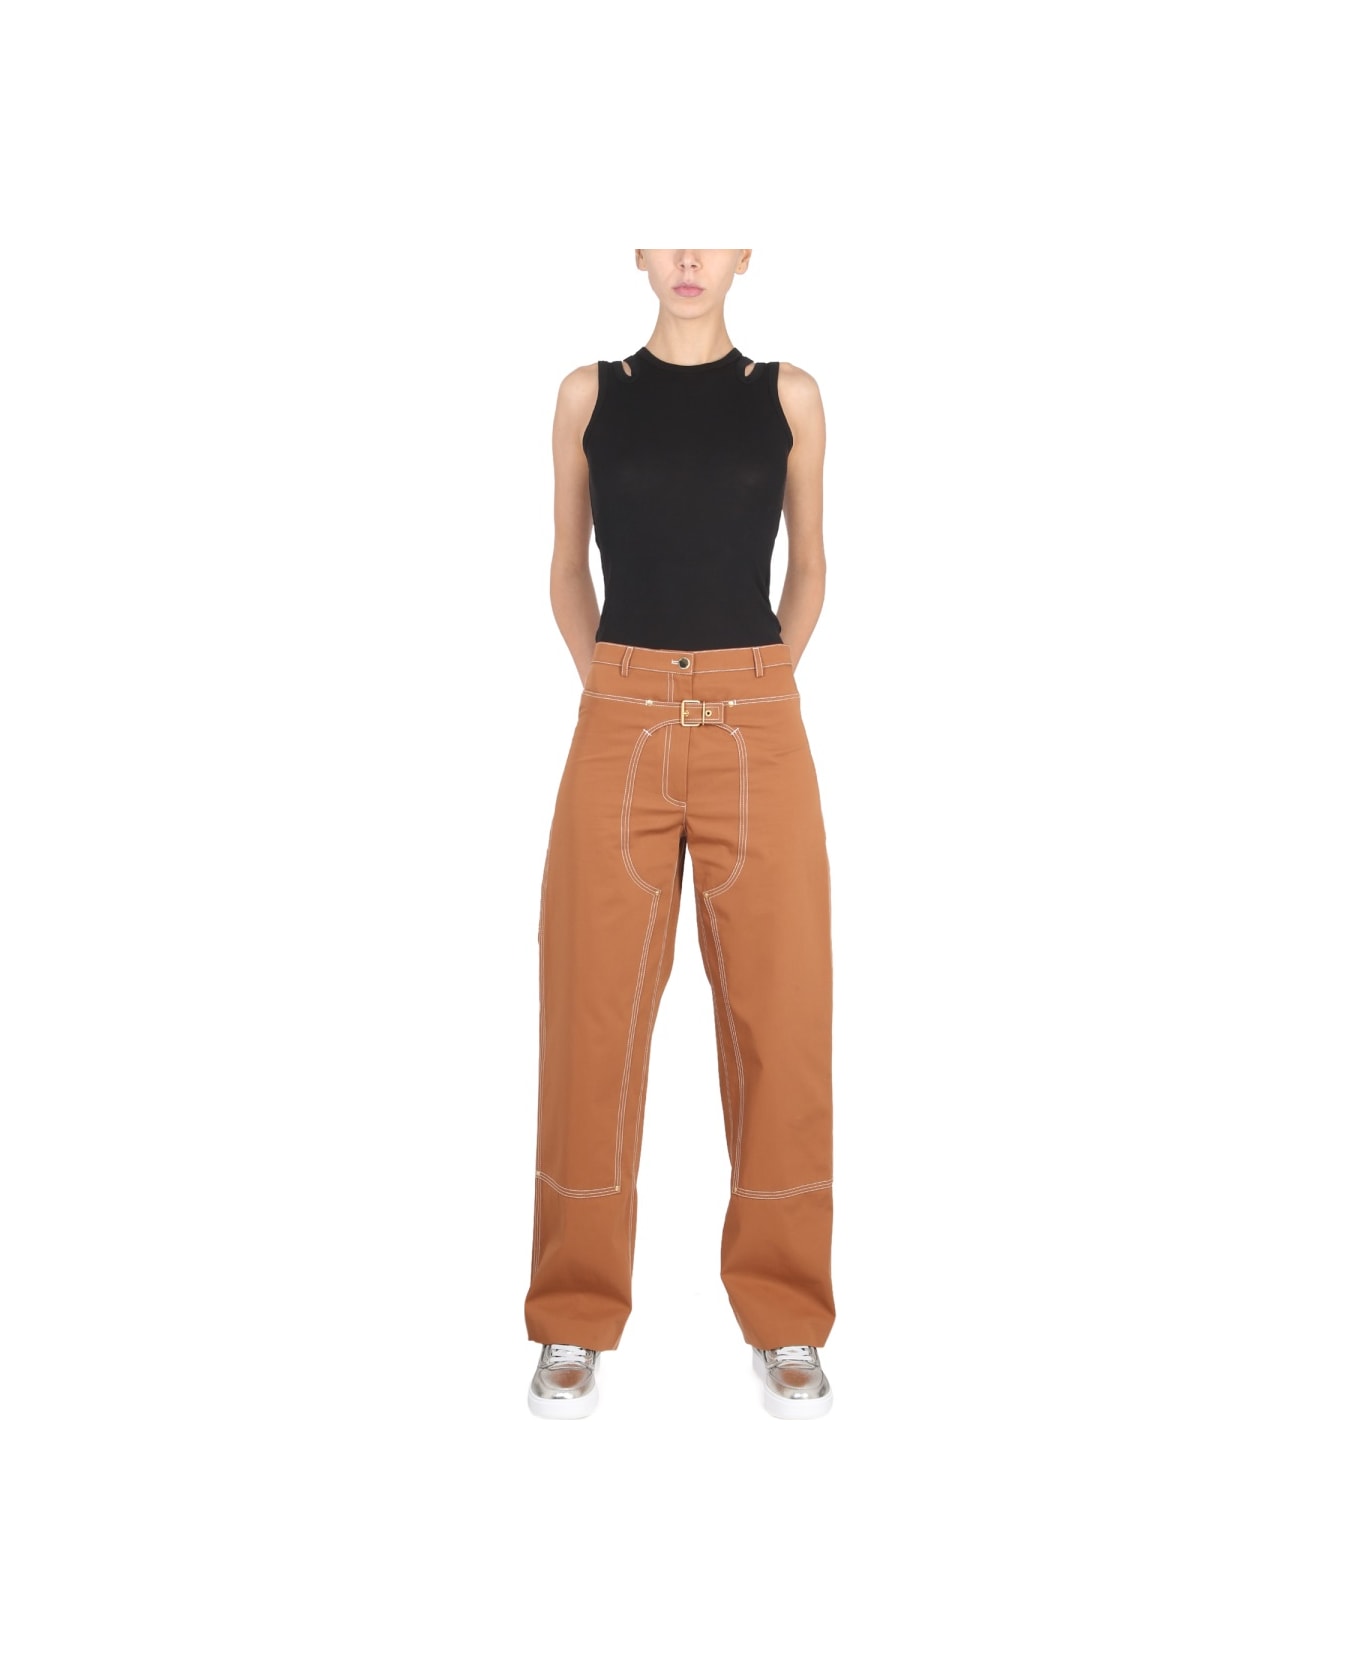 Stella McCartney Pants With Buckle - BROWN ボトムス